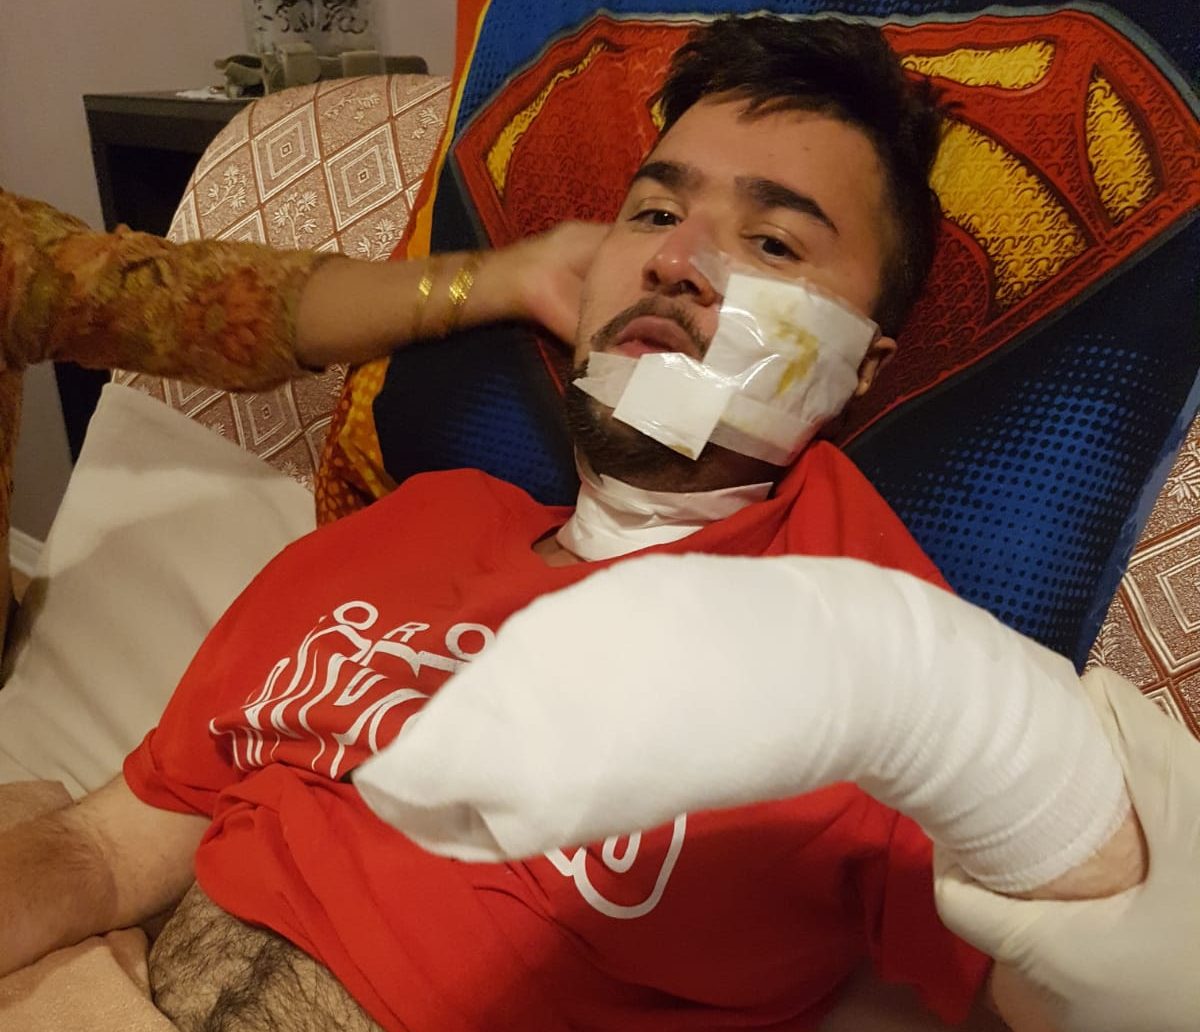 Man Left with Burns to Face and Arm After Samsung Galaxy Phone Exploded